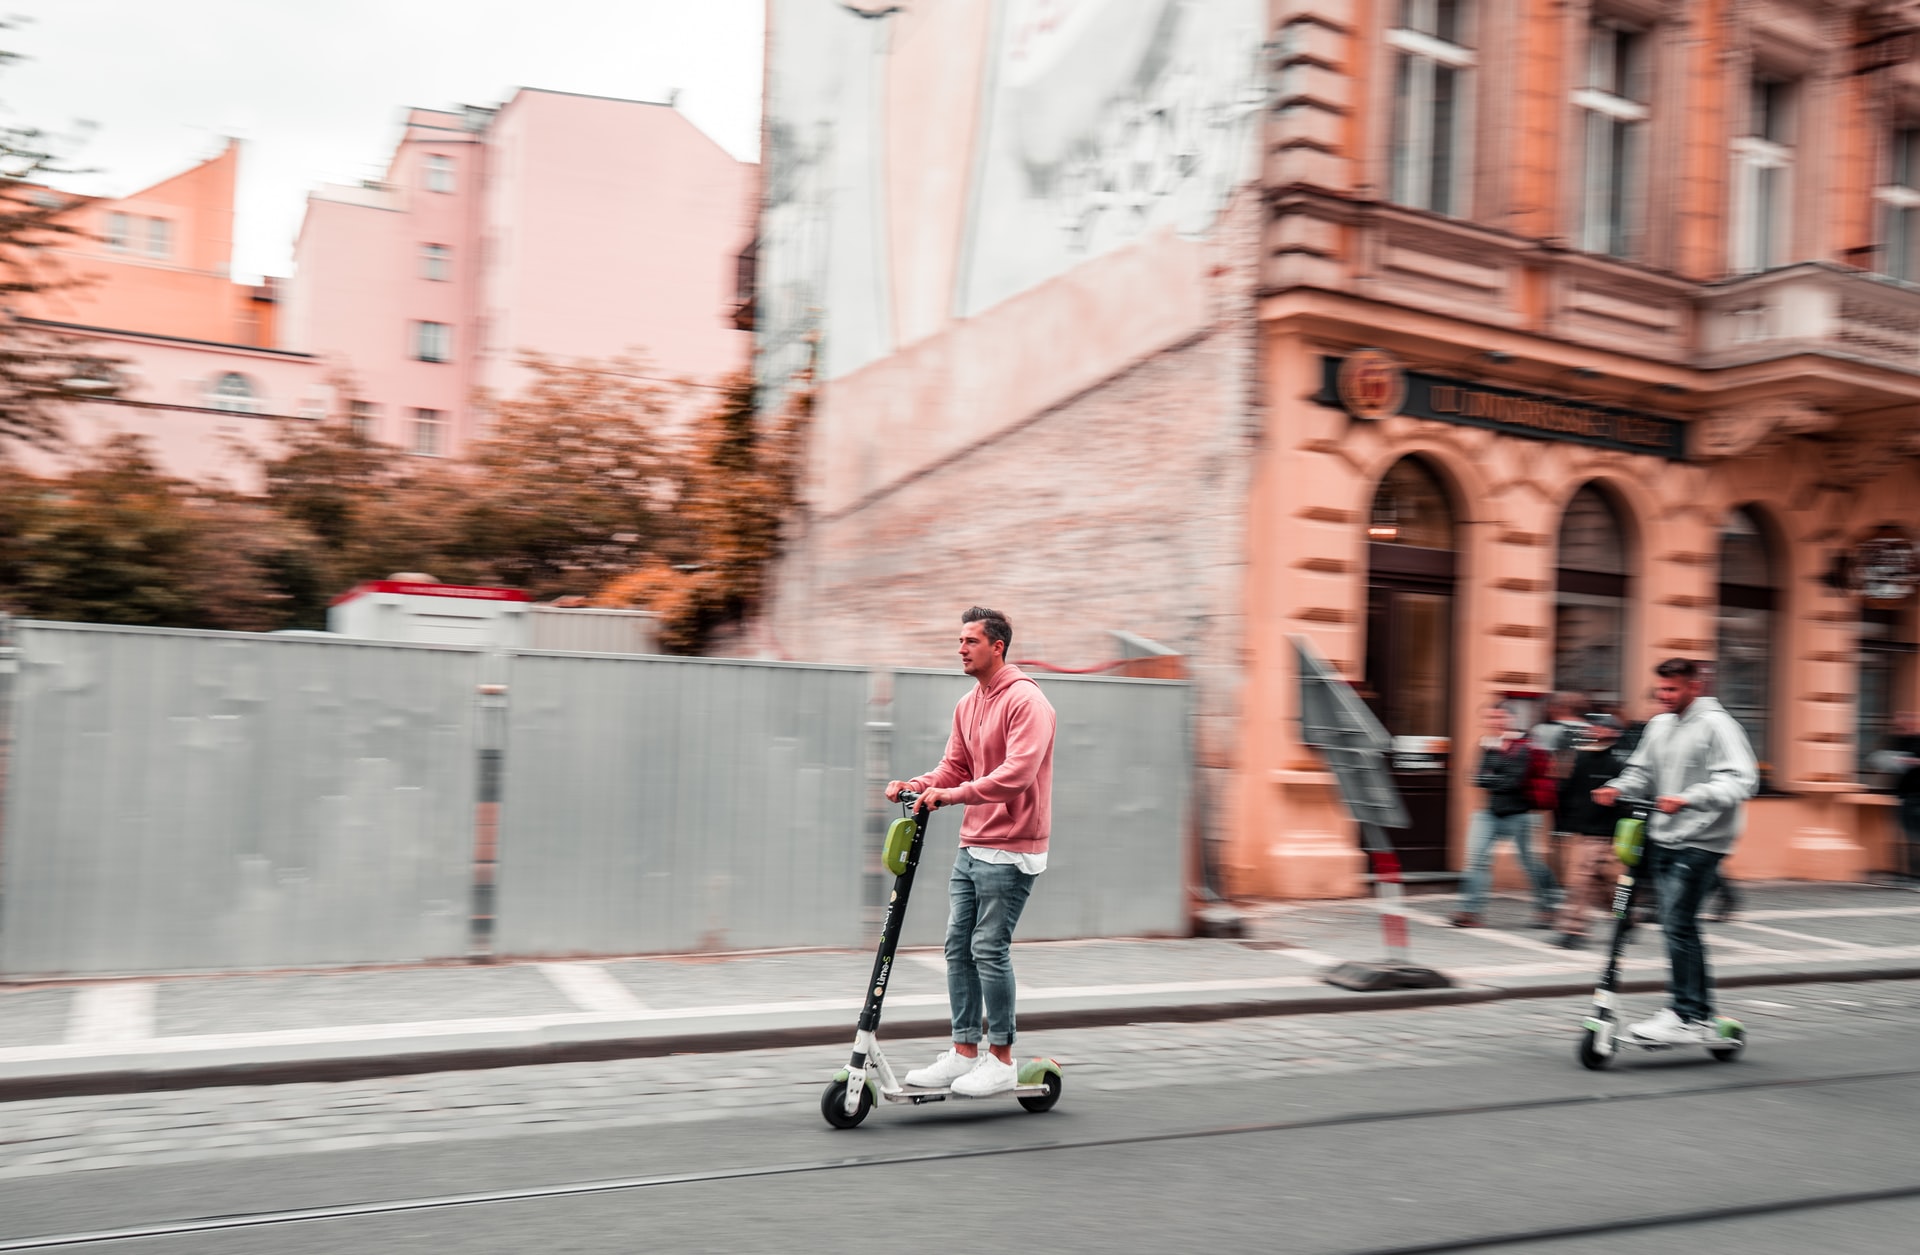 Bird Introduces AR-powered Parking Technology to Geo-localize Parked Scooters